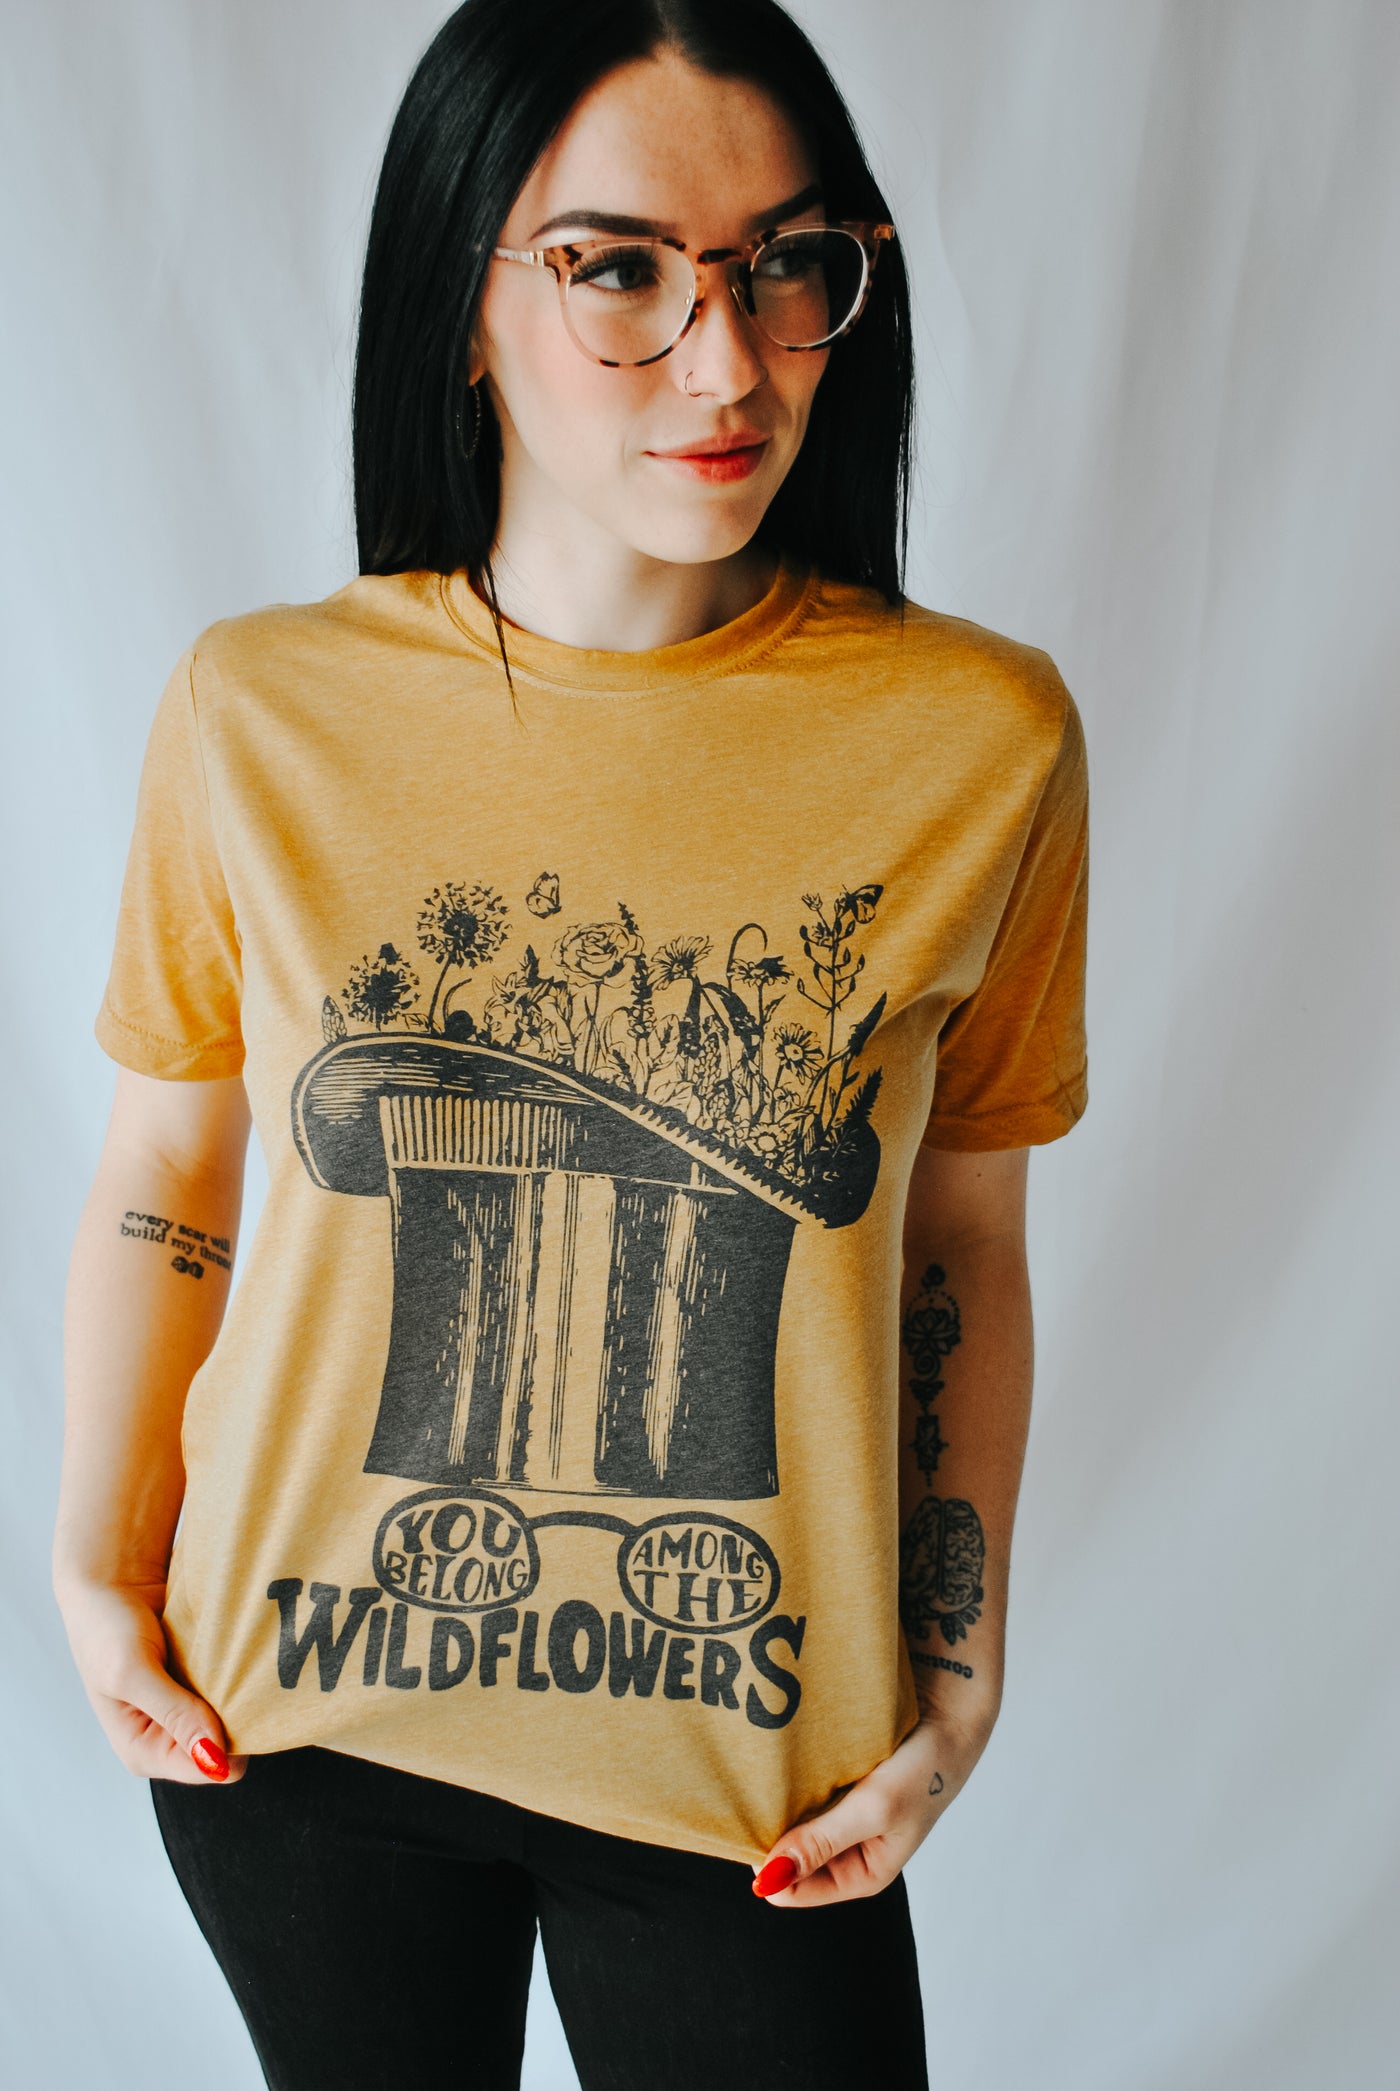 You Belong With A Field Of Wildflowers tee